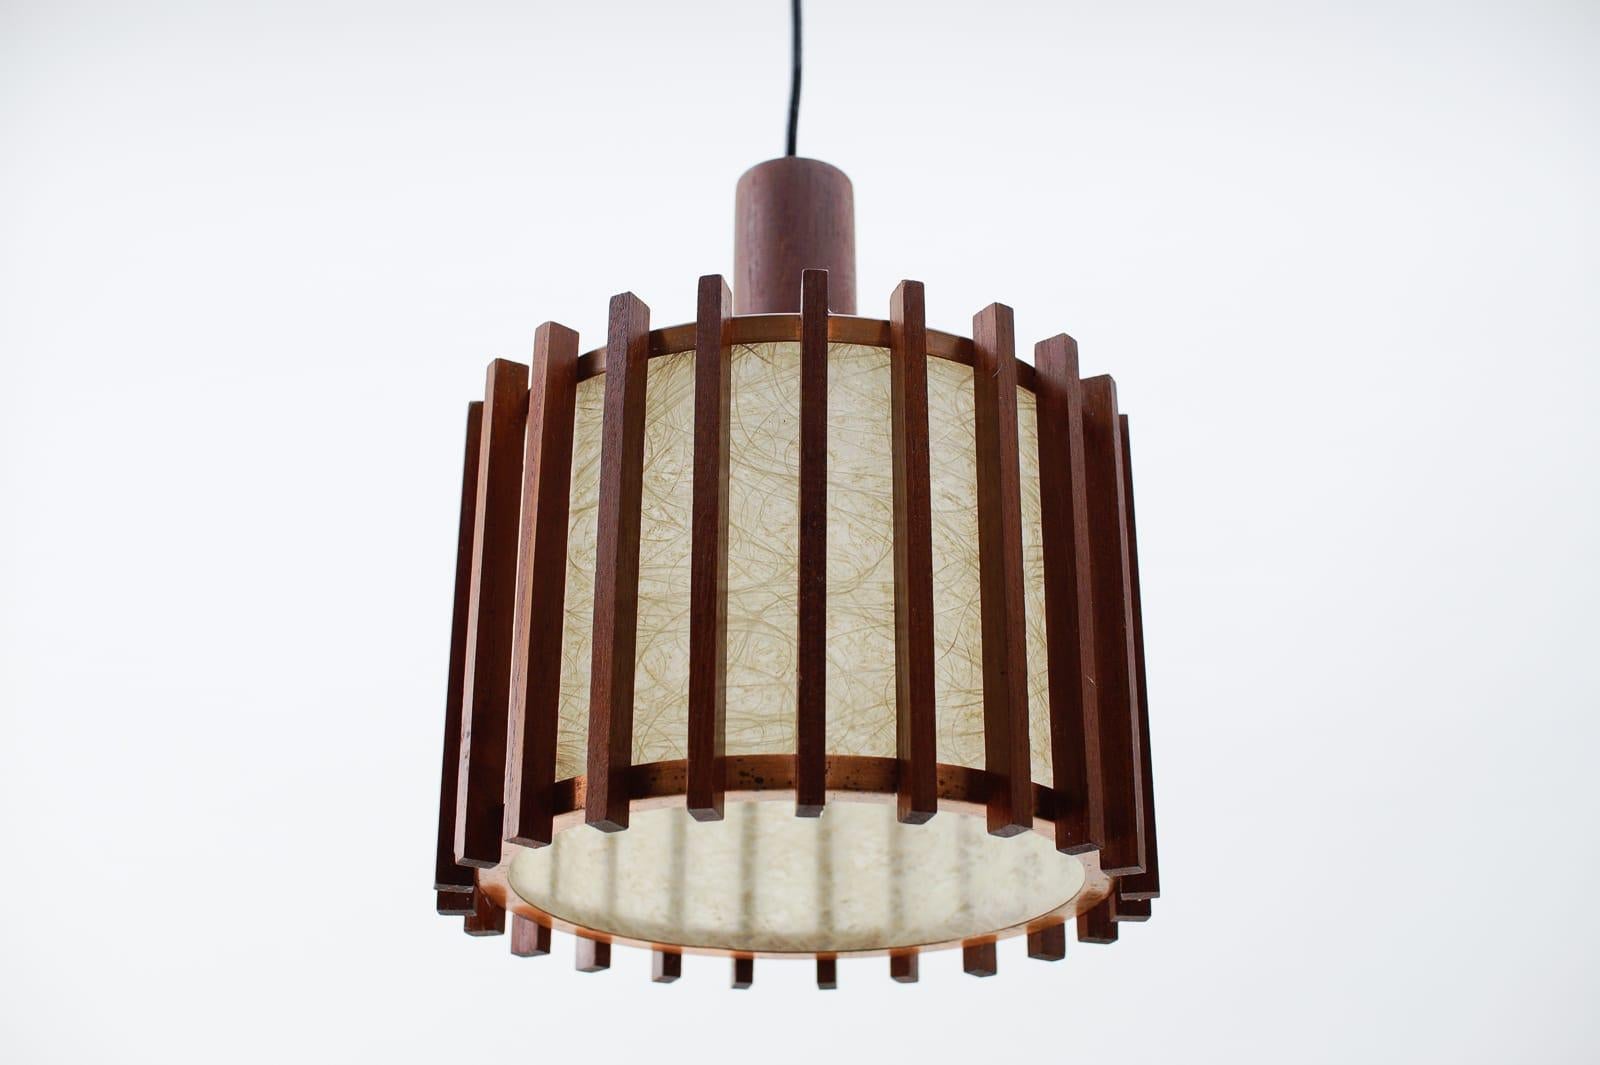 Pair of Scandinavian Mid-Century Modern Ceiling Lamps in Teak Wood and Copper In Good Condition For Sale In Nürnberg, Bayern